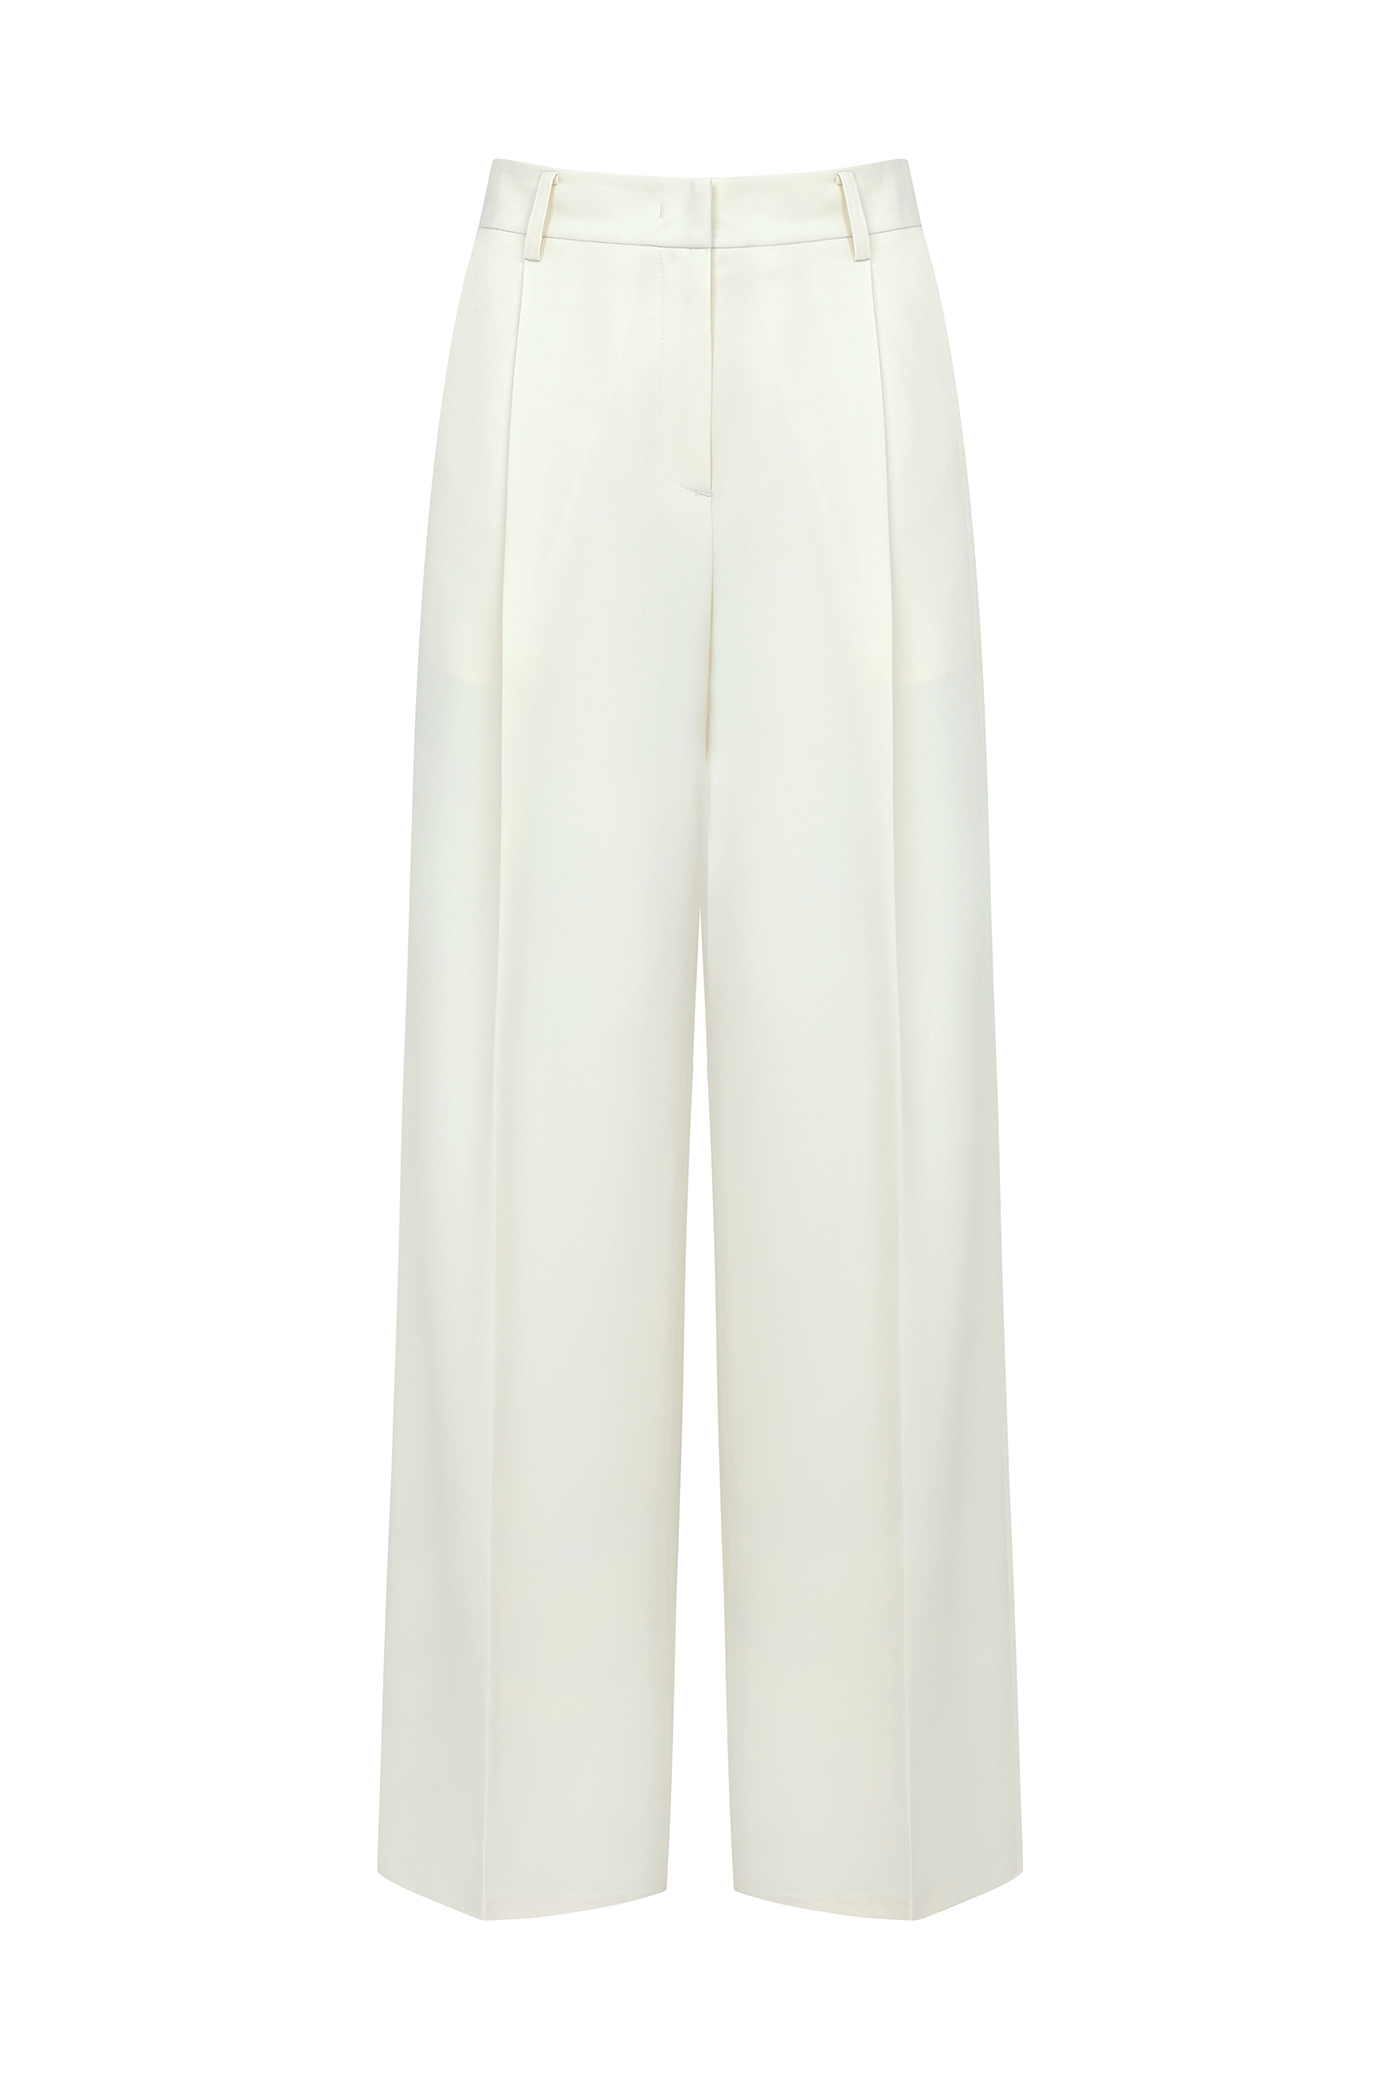 Summer One-Tuck Pants[LMBCSUPT503]-Ivory